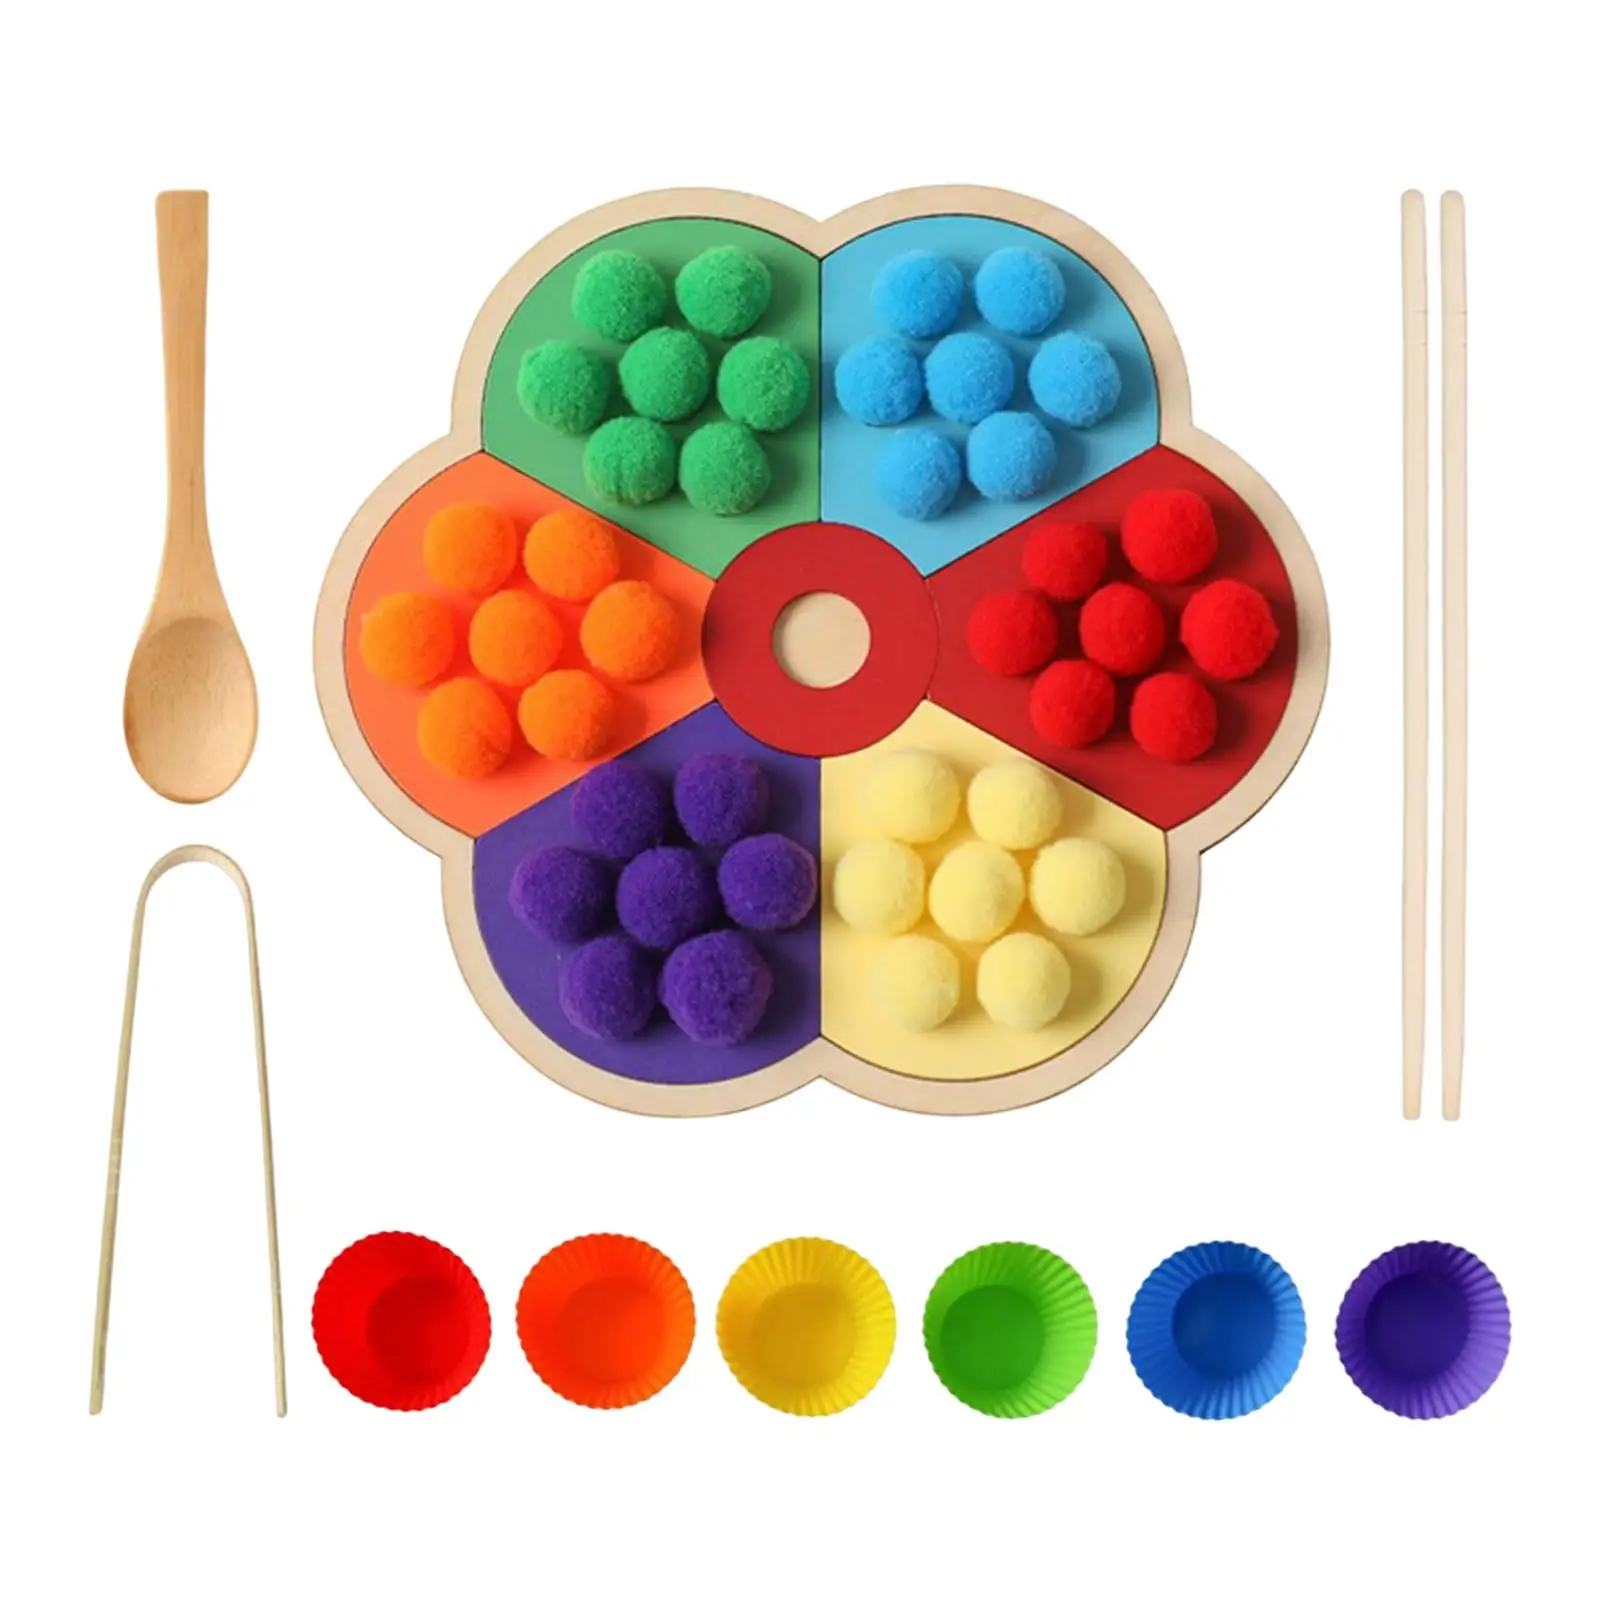 Rainbow Peg Board Early Education Color Sorting Game Fine Motor Skill Counting Color Sorting Toys for Preschool Birthday Gifts